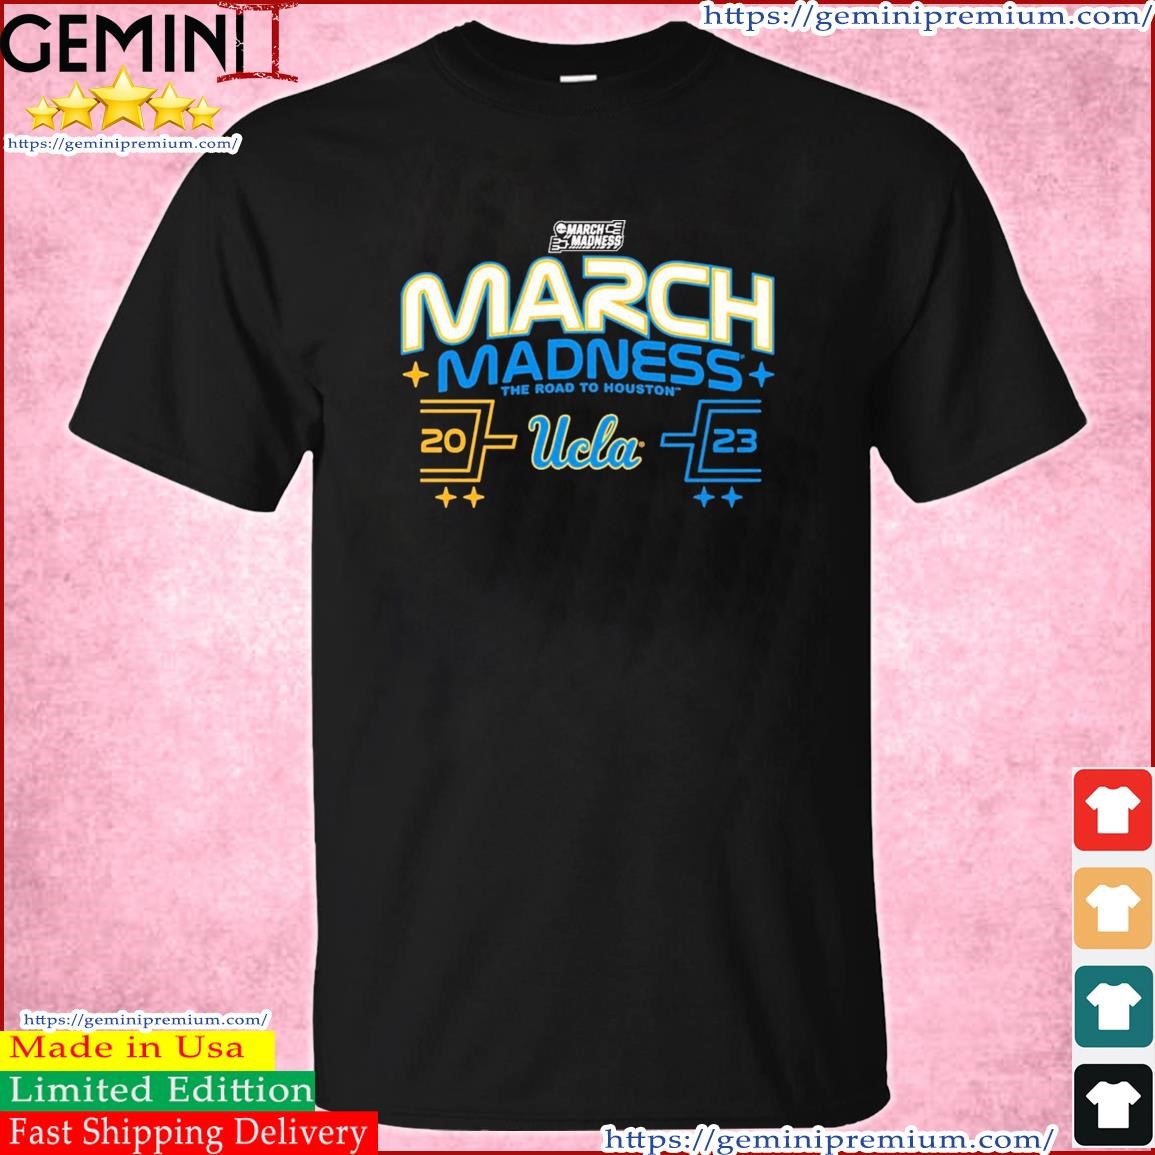 UCLA Men's Basketball 2023 NCAA March Madness Road To Houston Shirt